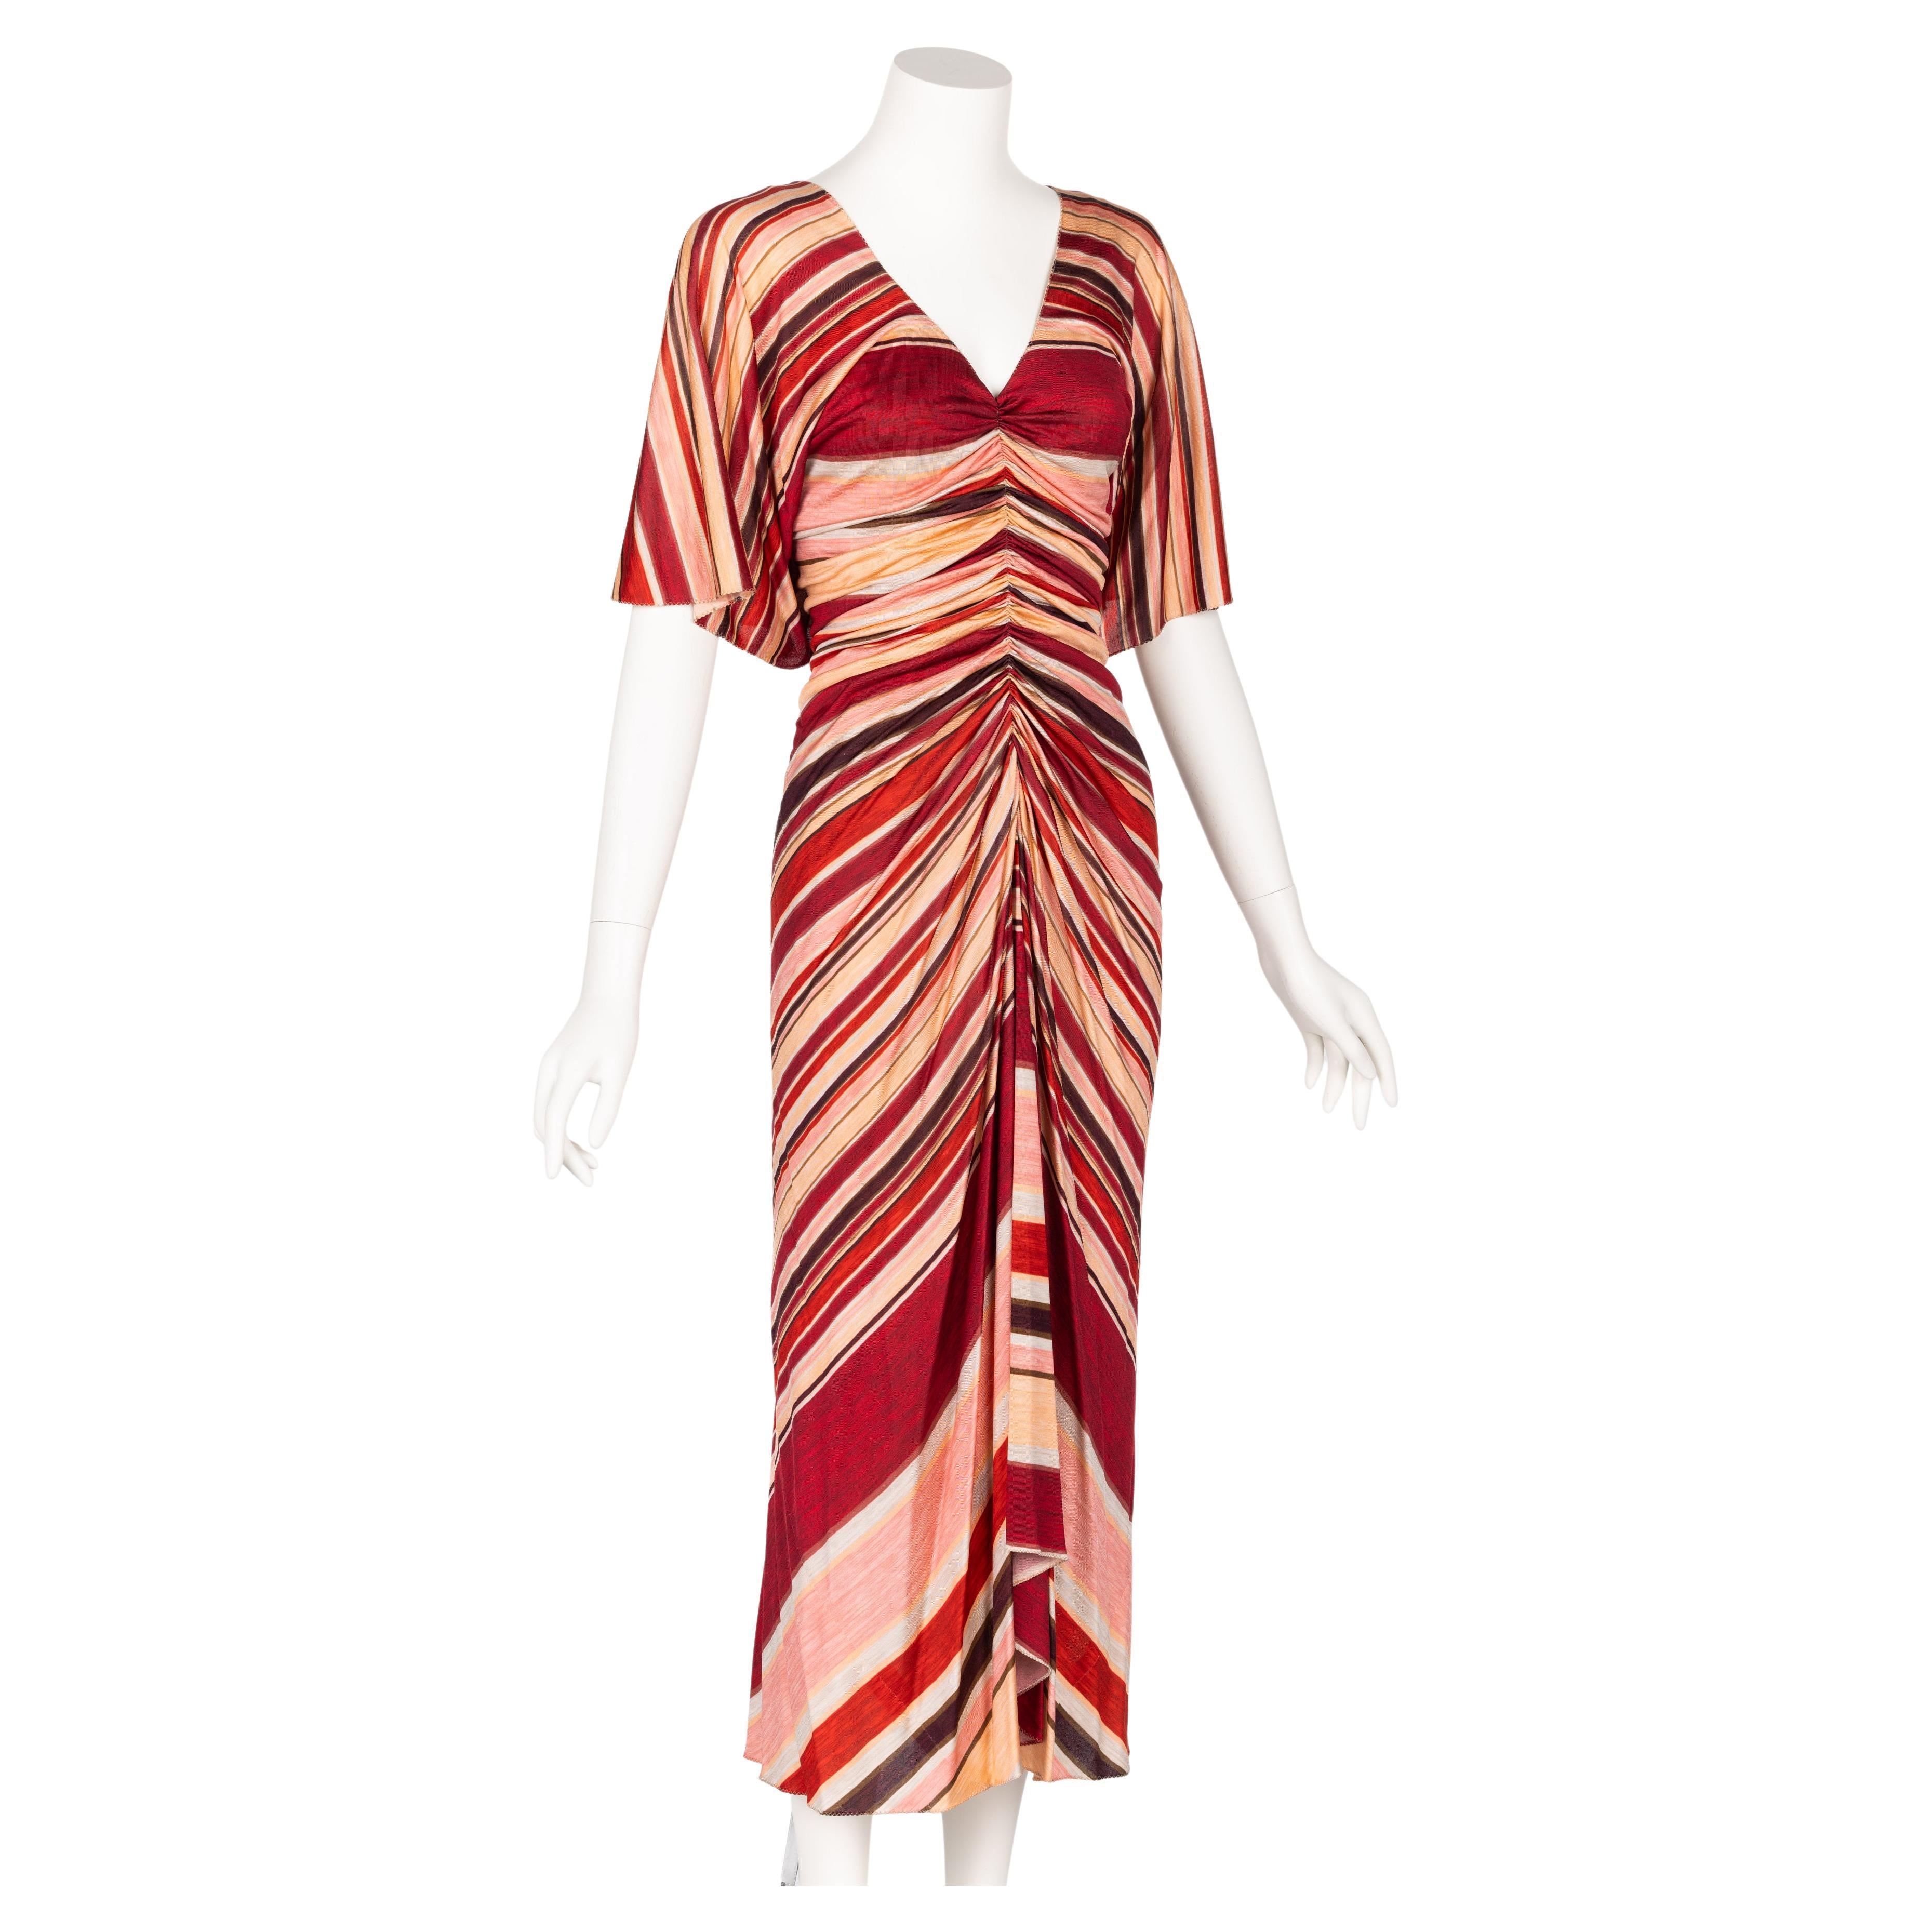 Marc Jacobs Spring 2011 Red & Pink Striped Silk Dress In Excellent Condition For Sale In Boca Raton, FL